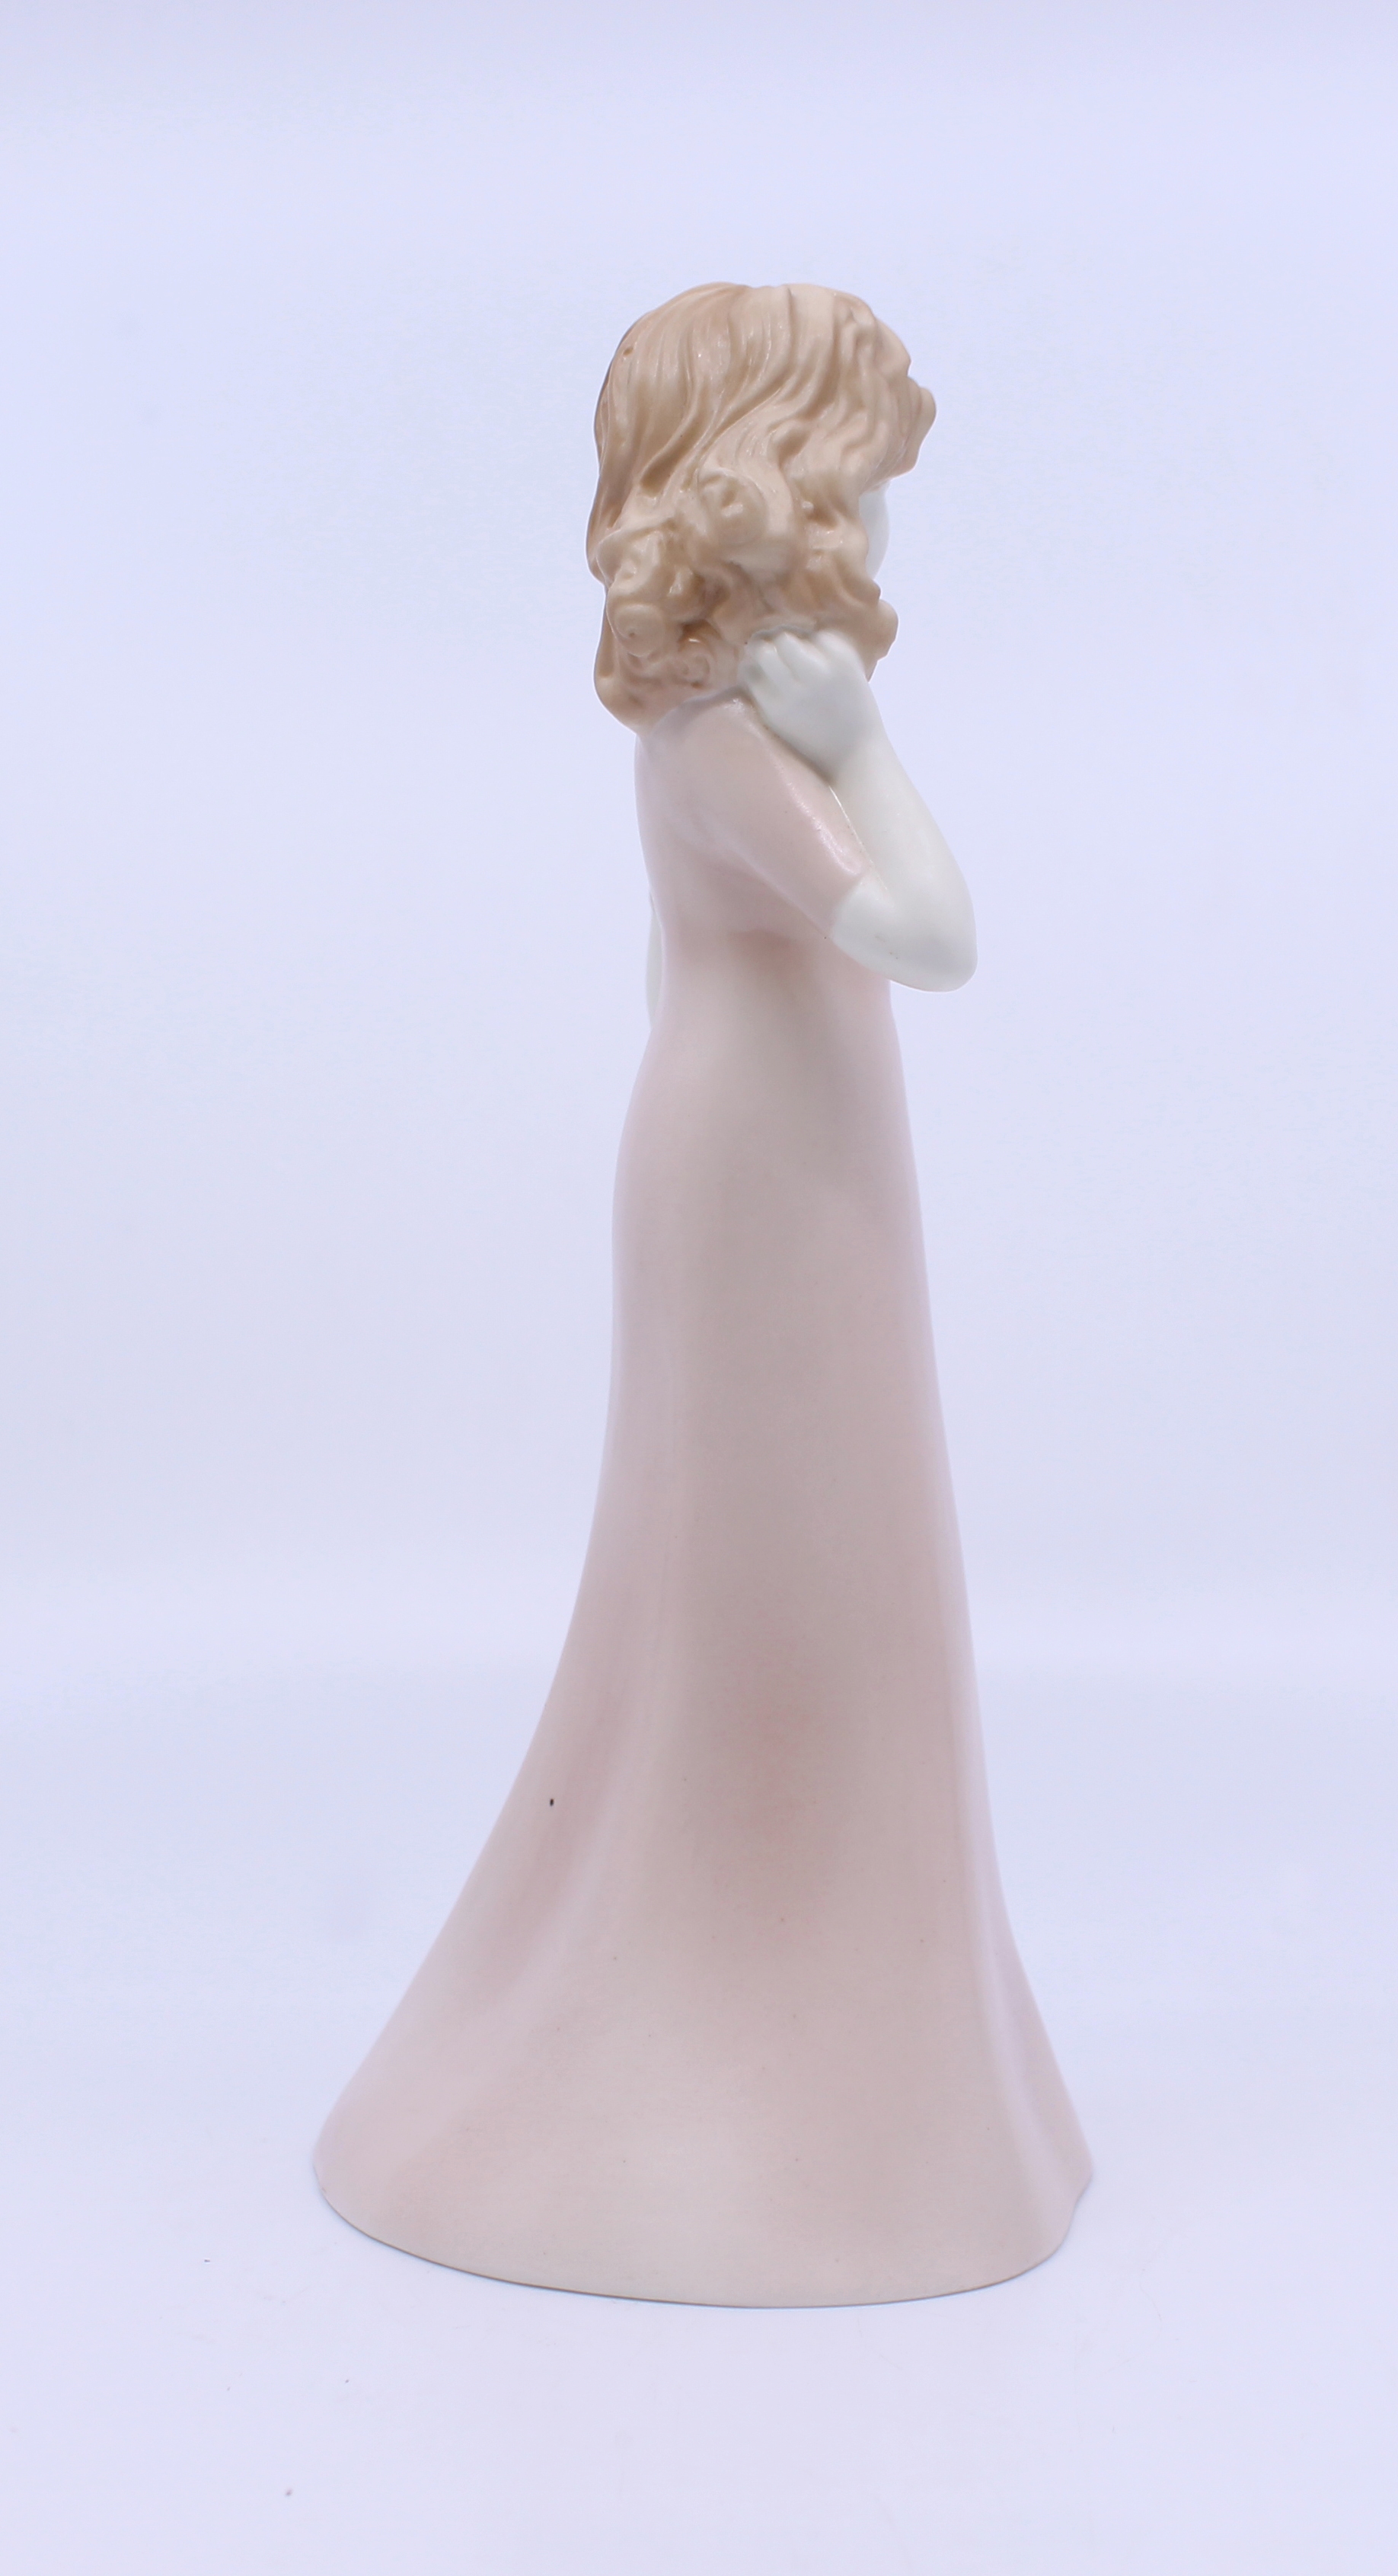 Royal Worcester Figurine Pretty as a Picture - Image 2 of 5